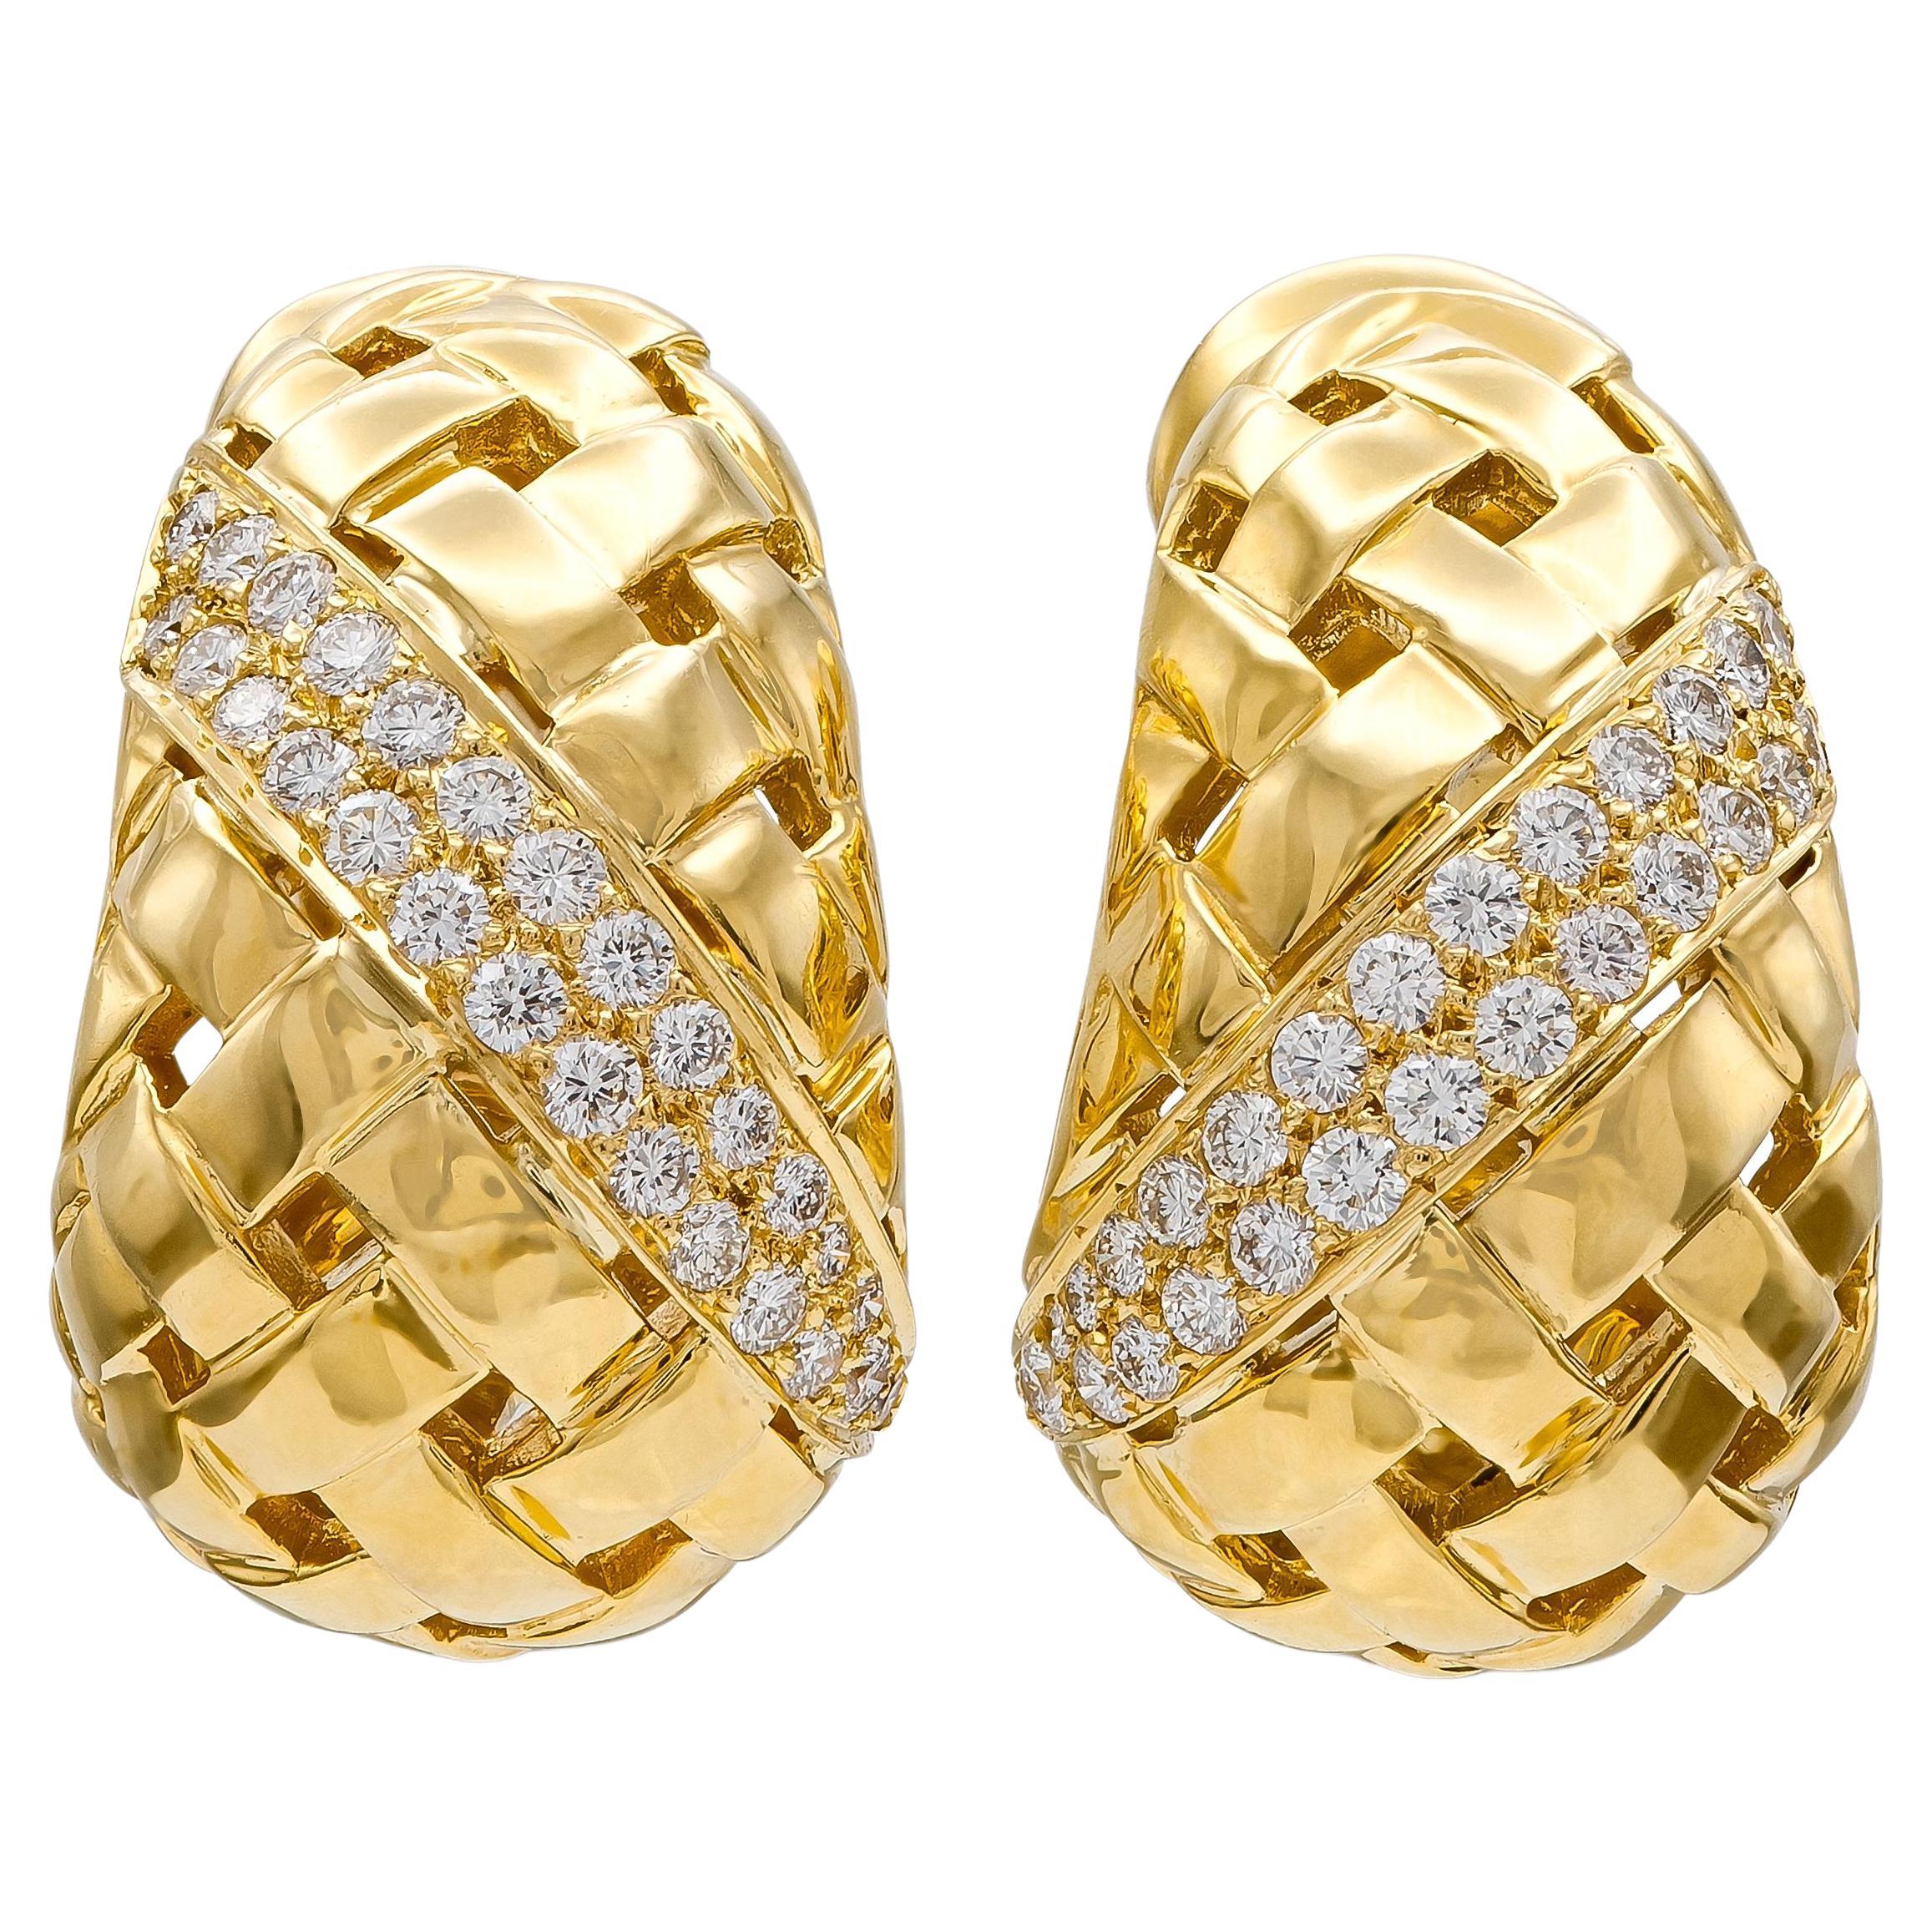 Vintage 1989 Tiffany & Co. Gold Woven Earrings with Diamonds